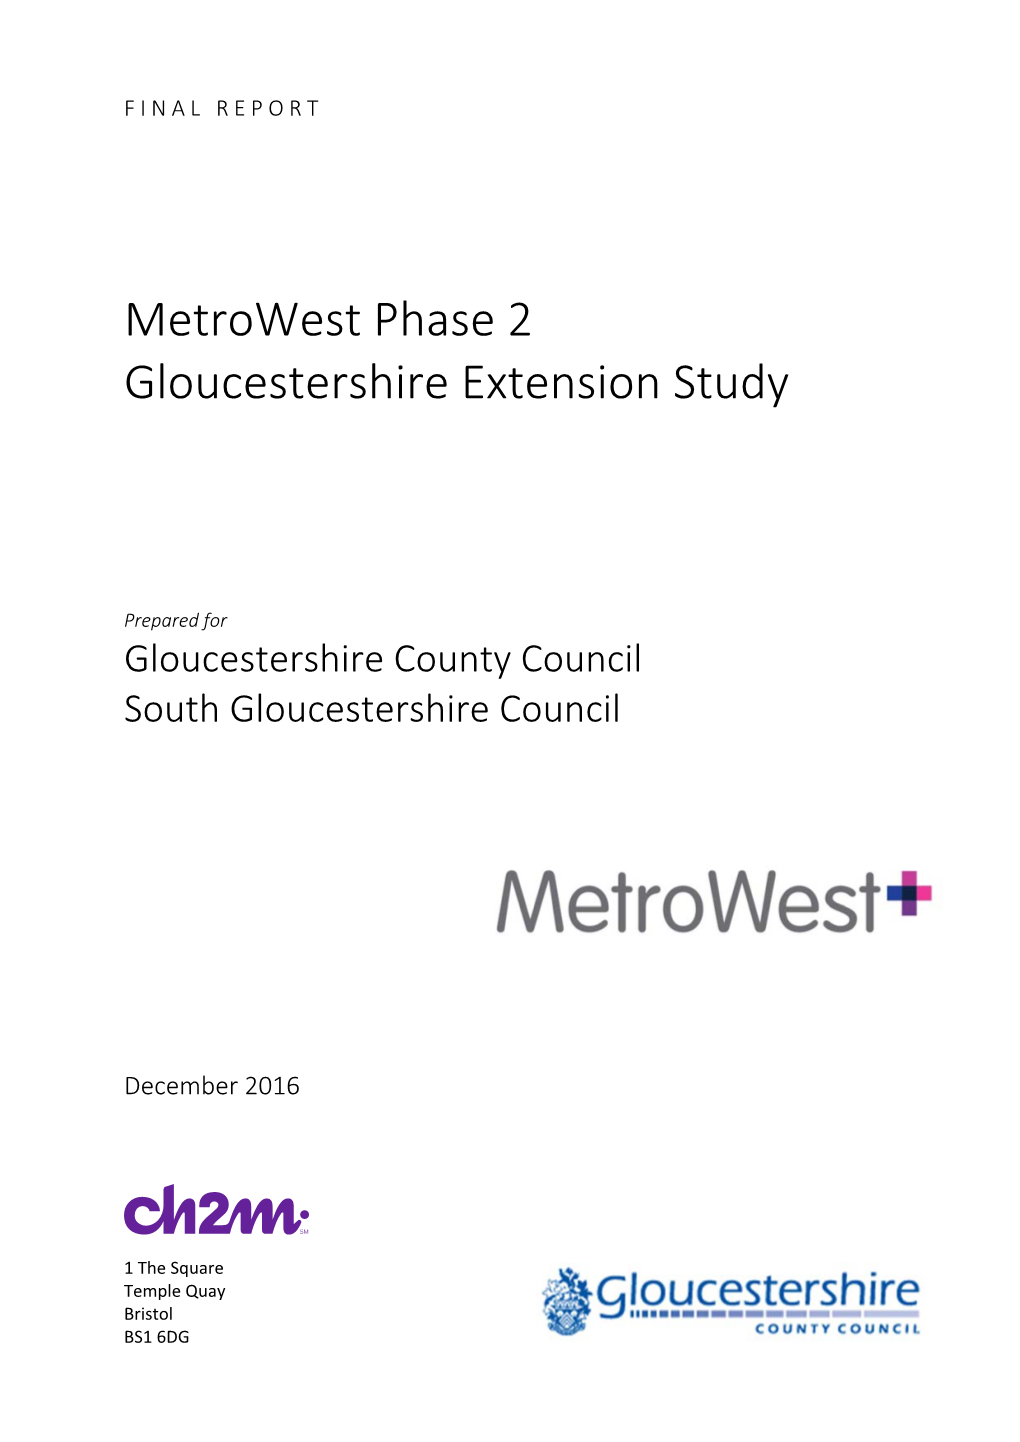 Metrowest Phase 2 Gloucestershire Extension Study